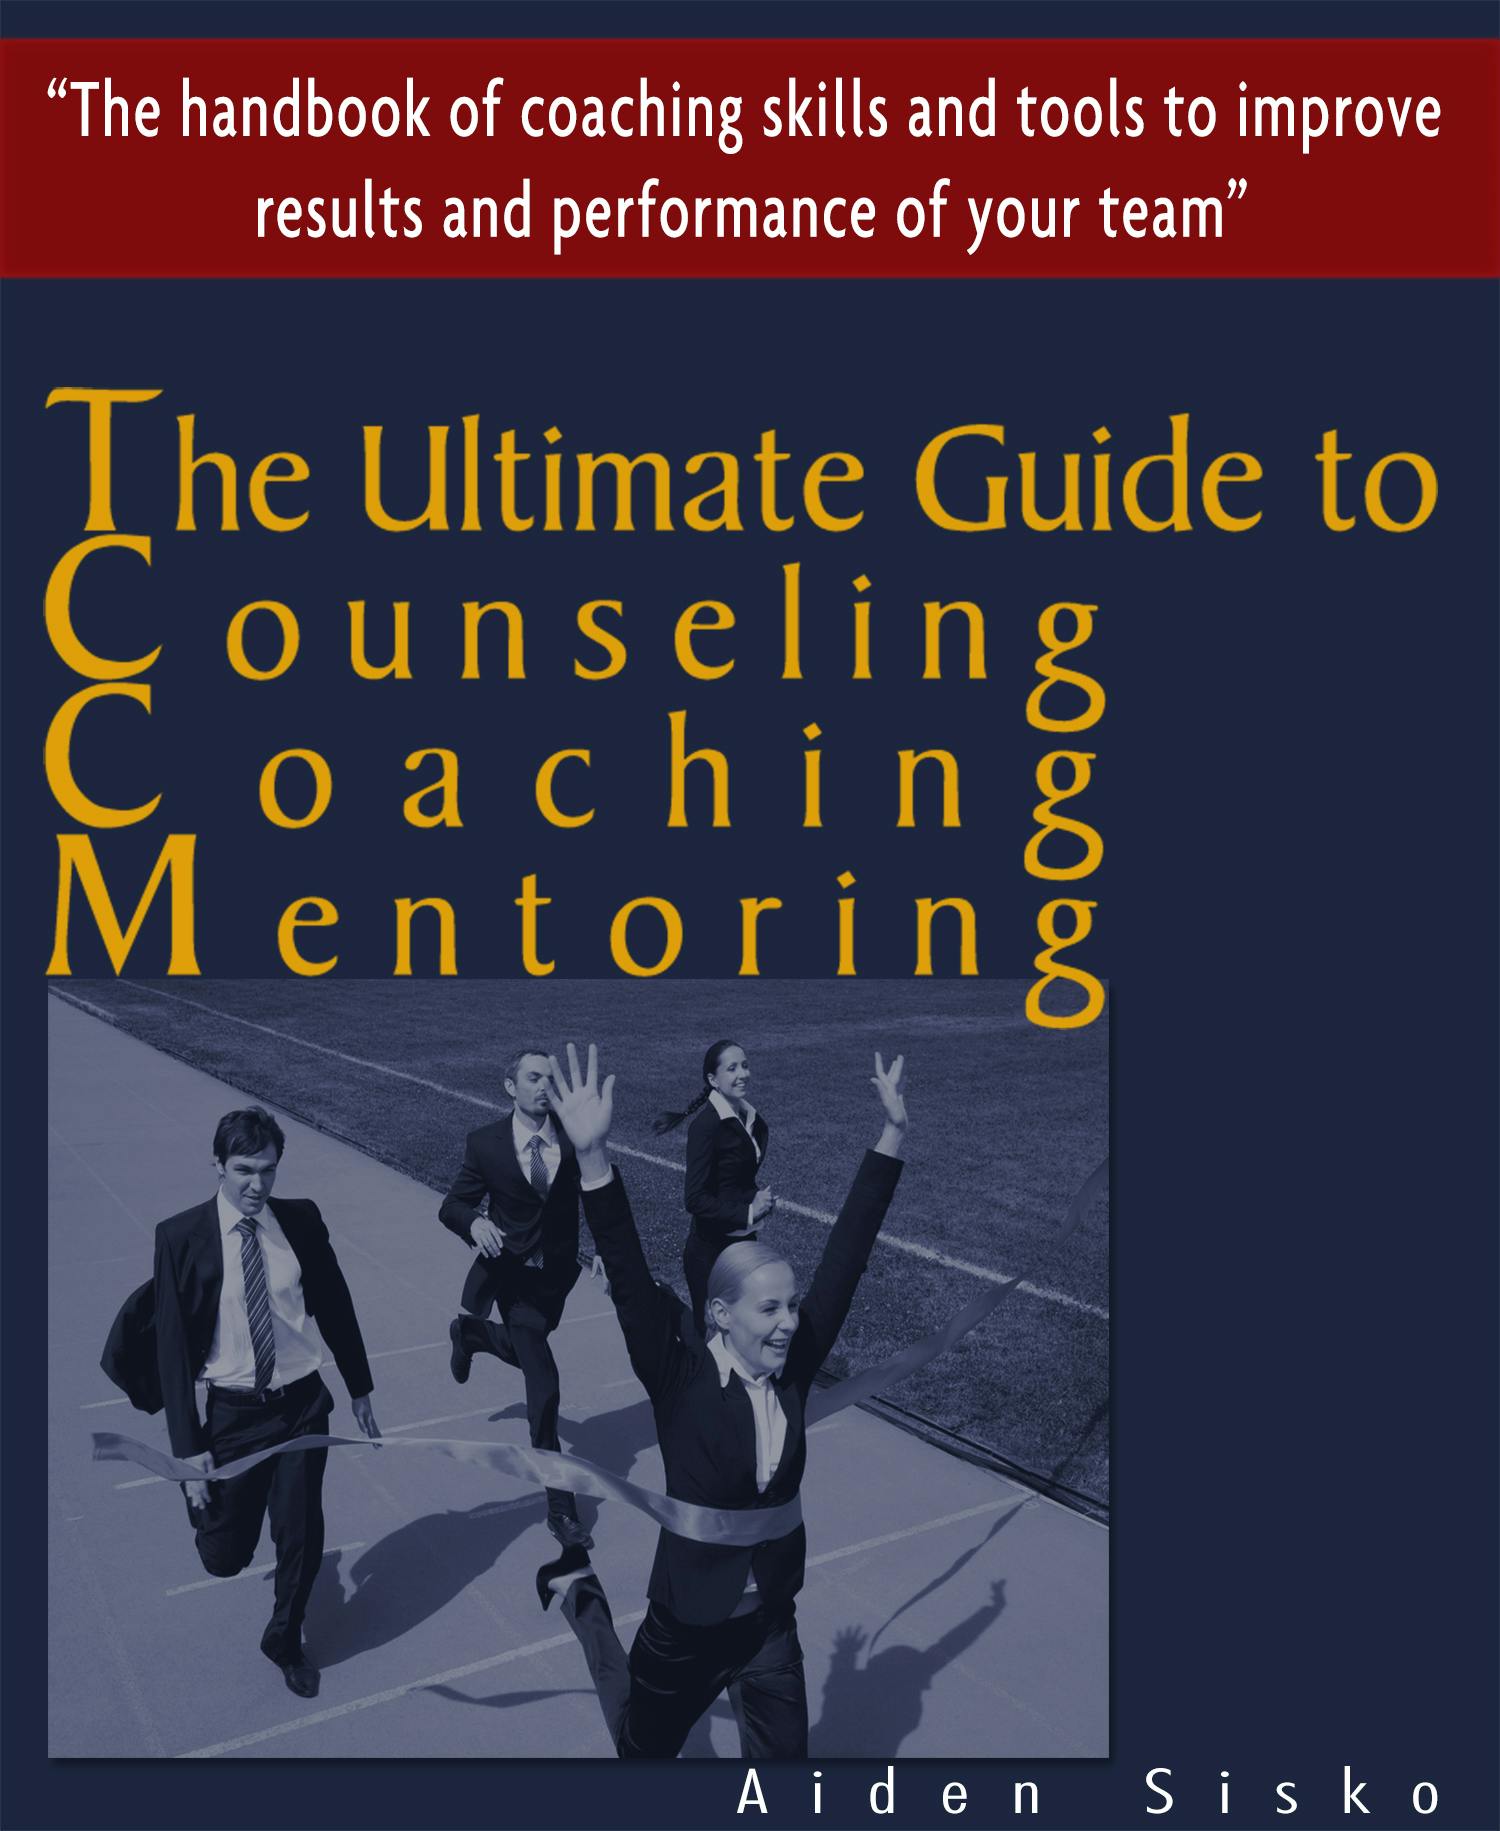 The Ultimate Guide to Counselling,Coaching and Mentoring - The Handbook of Coaching Skills and Tools to Improve Results and Performance Of your Team! - Aiden Sisko